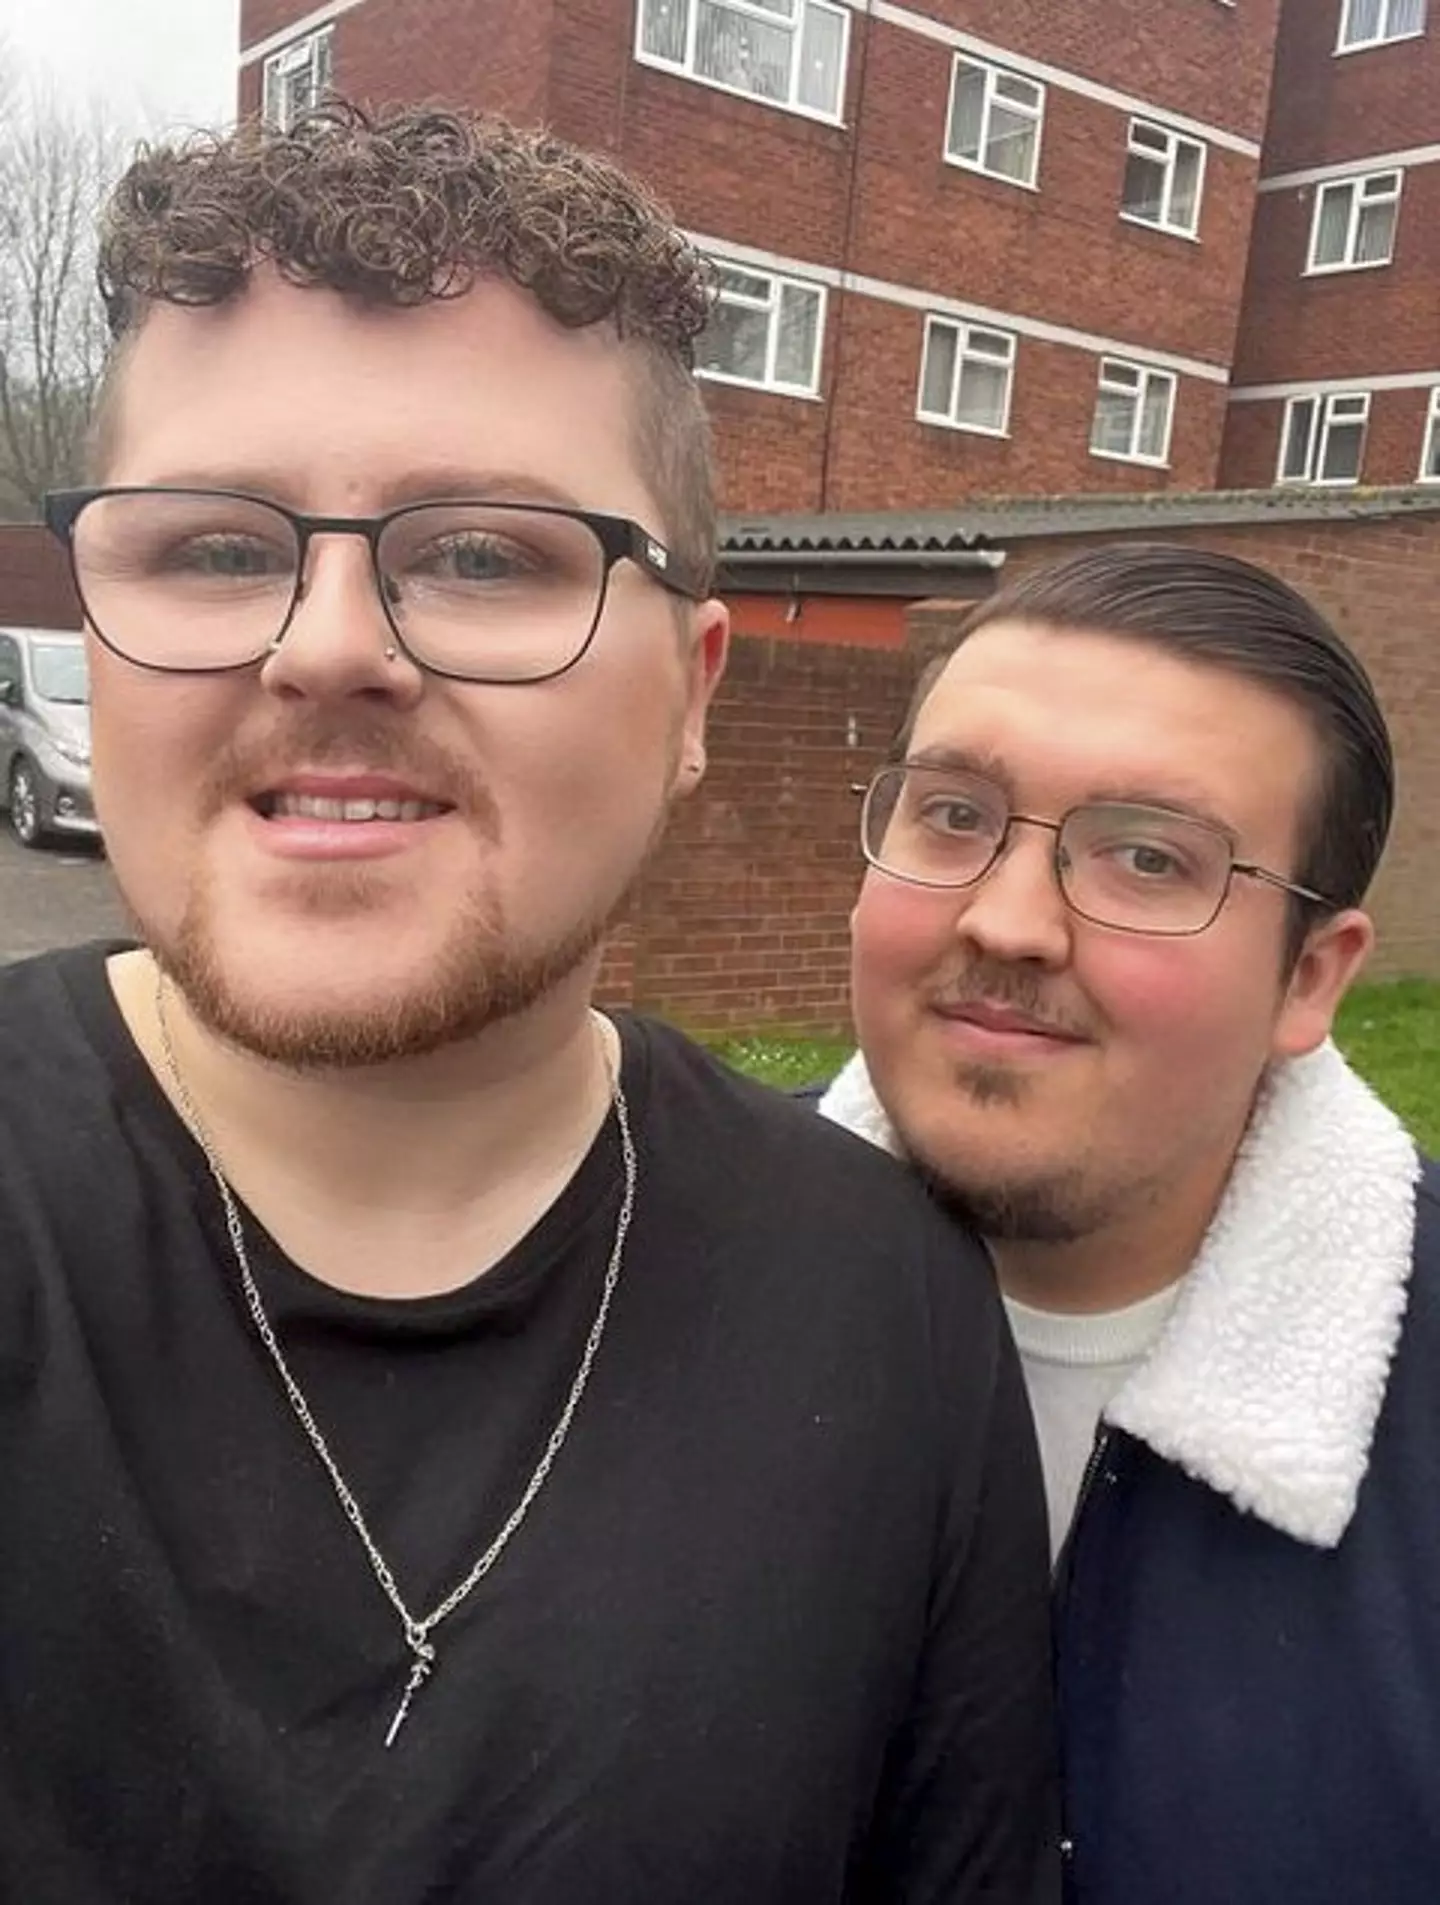 Bradley (left) and Joshua (right) have found lasting love with each other.